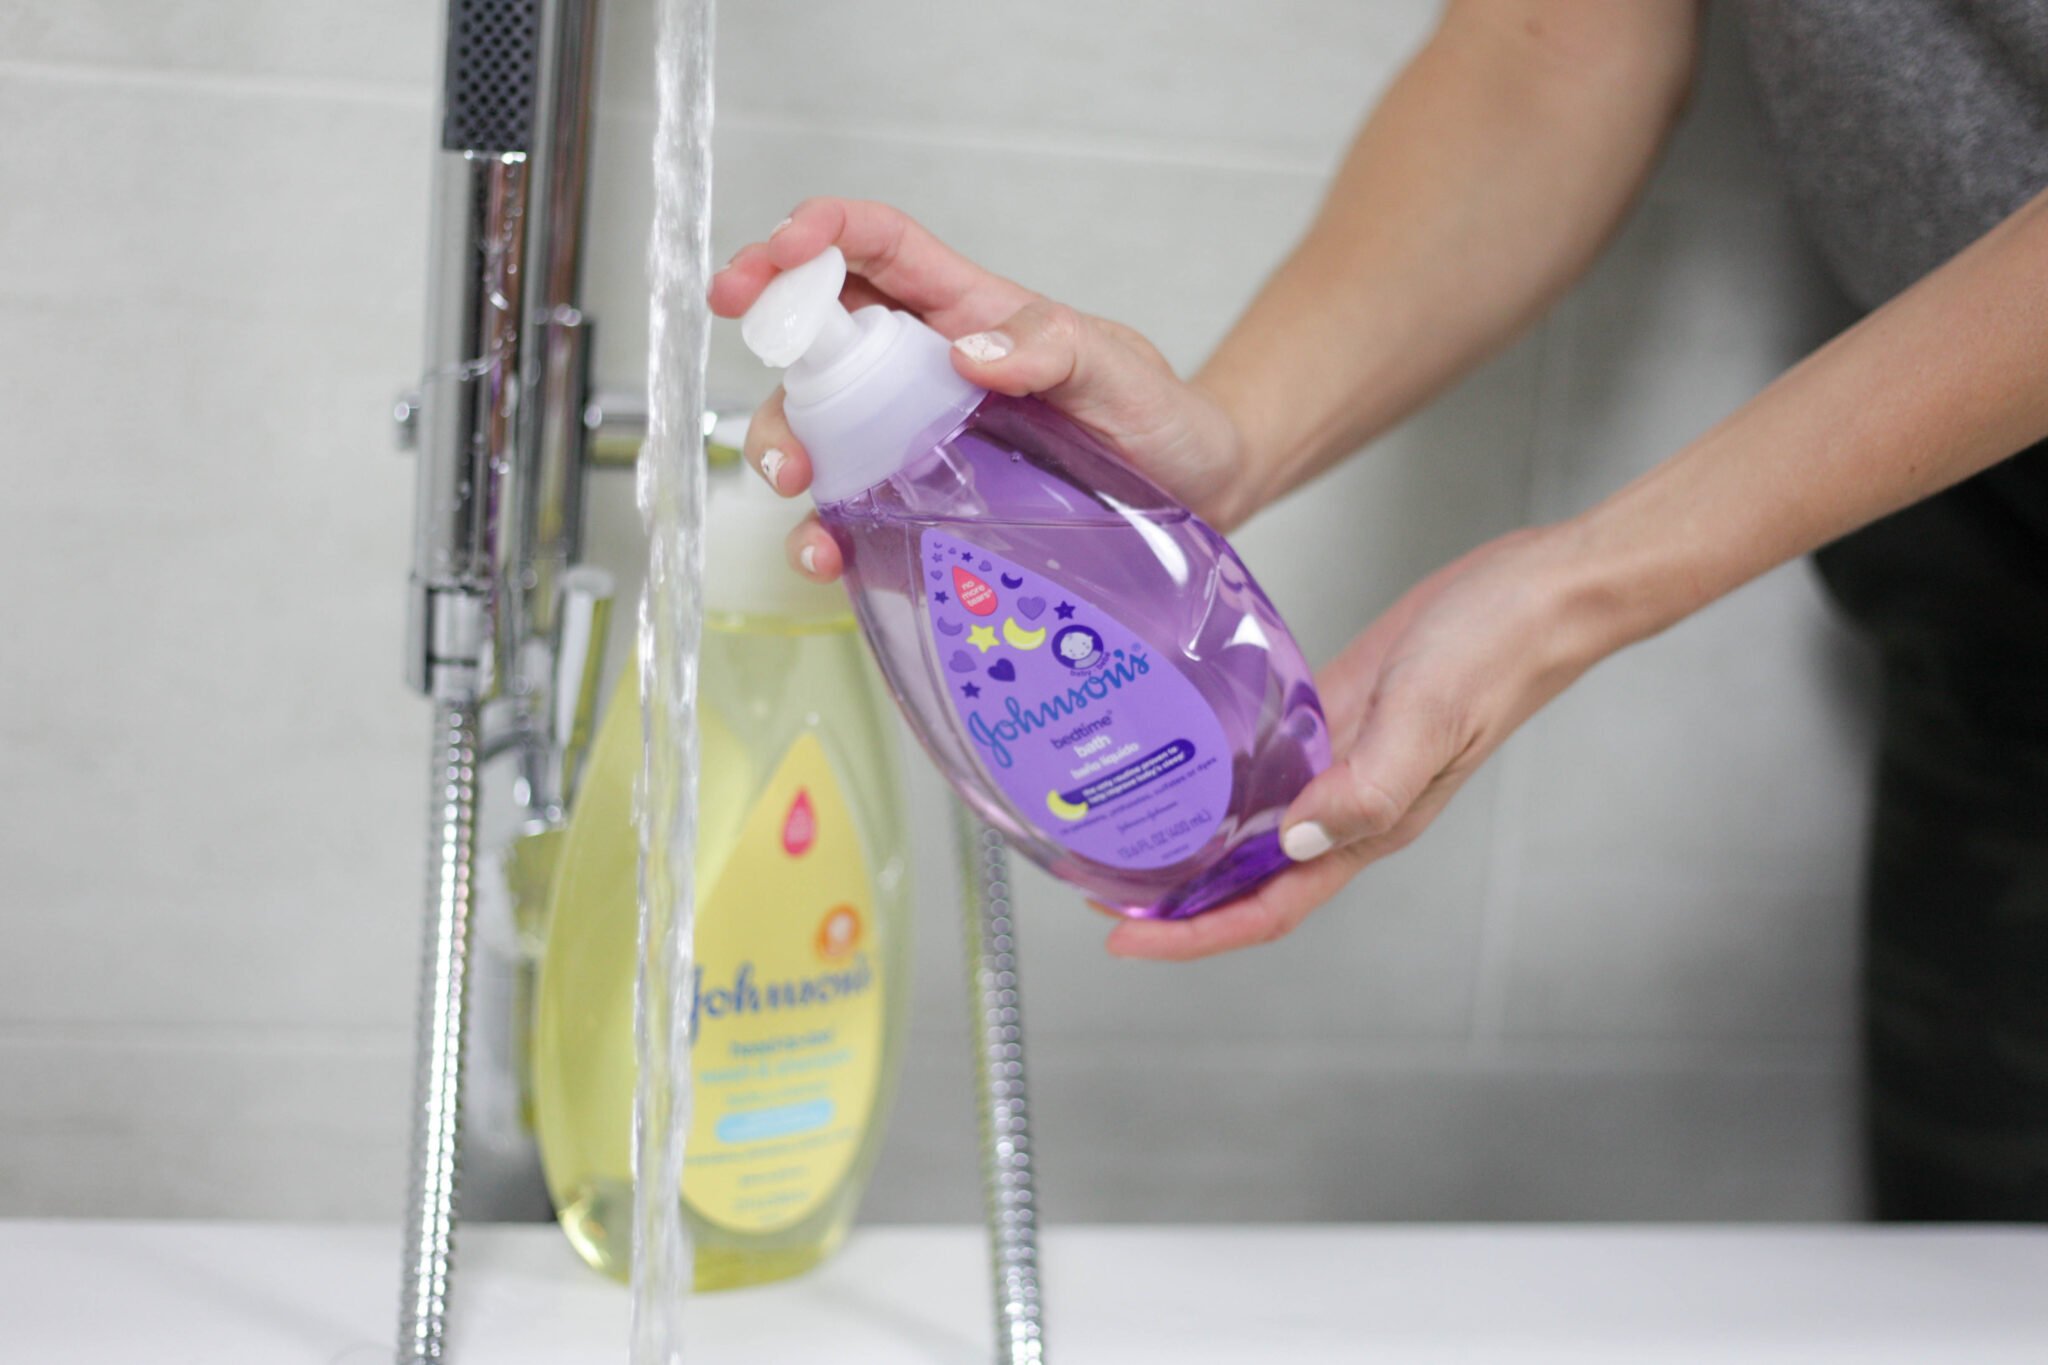 johnsons bedtime bath and head-to-toe wash